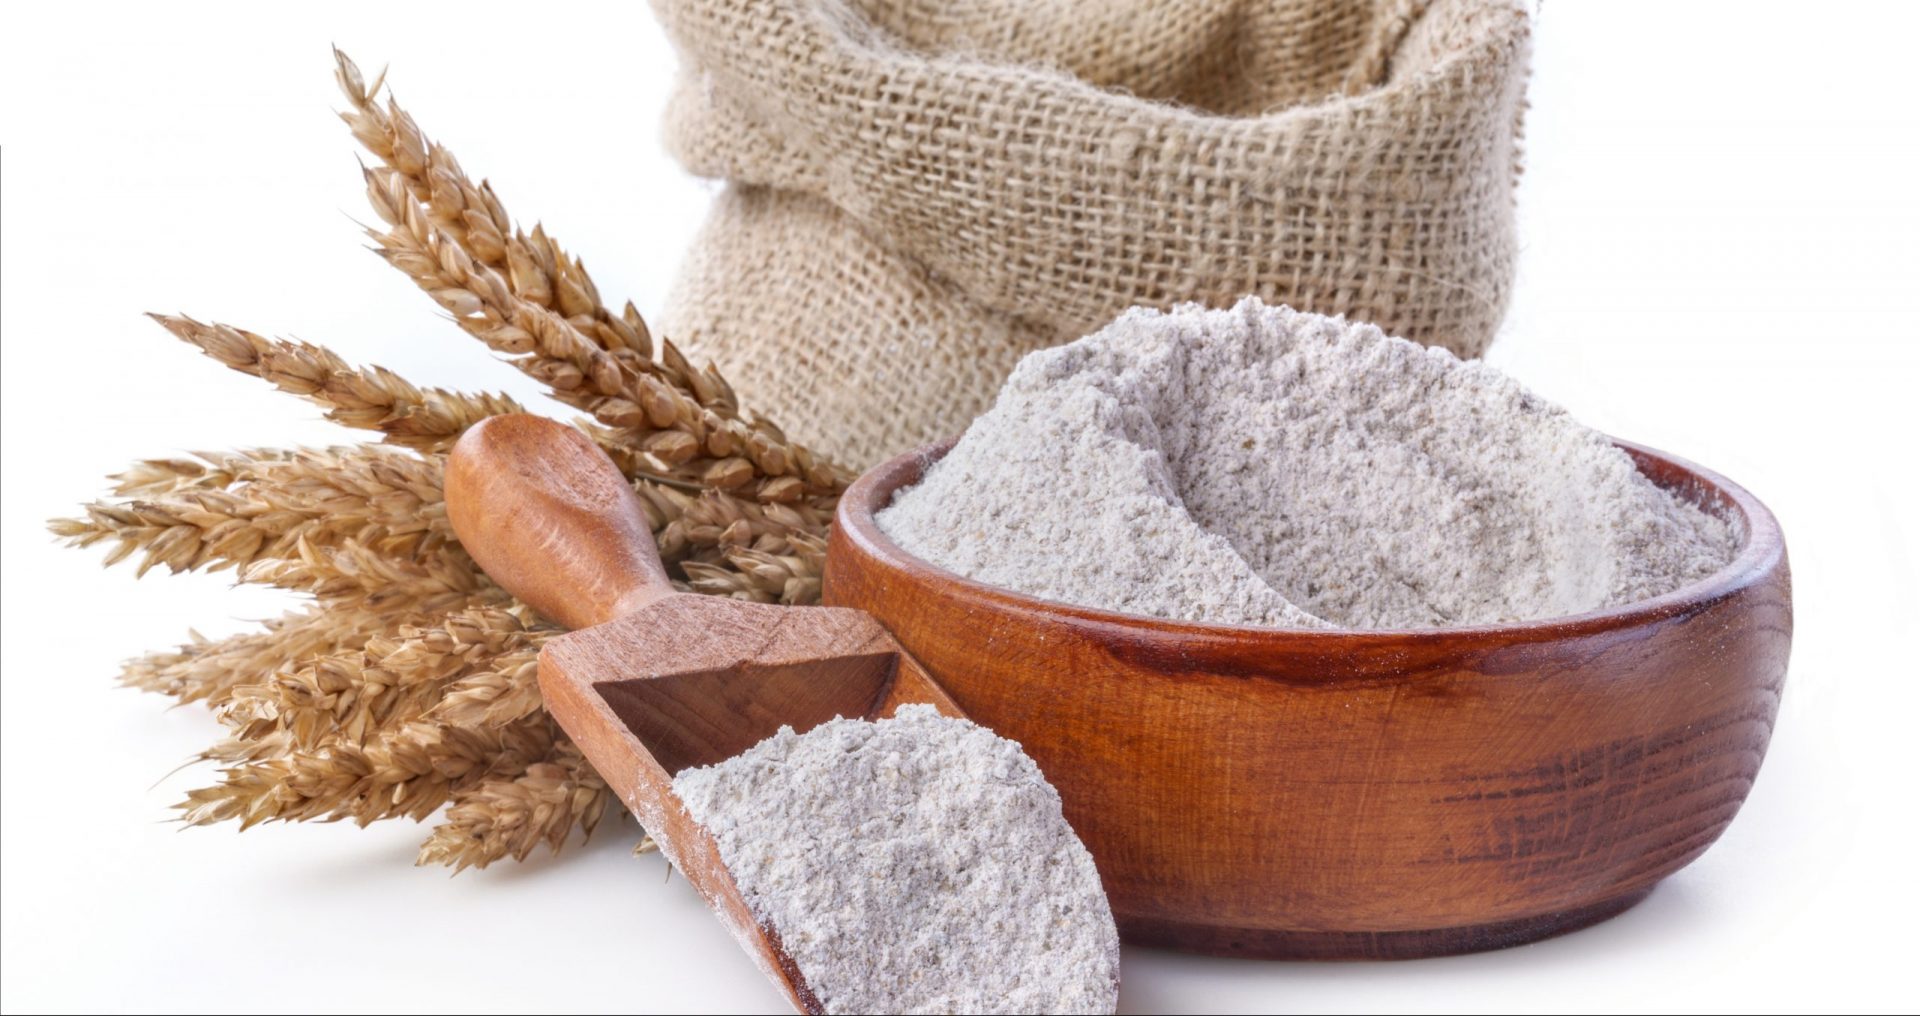 buckwheat flour substitute, substitution for buckwheat flour, buckwheat substitute for flour, substituting buckwheat flour, buckwheat flour substitutions